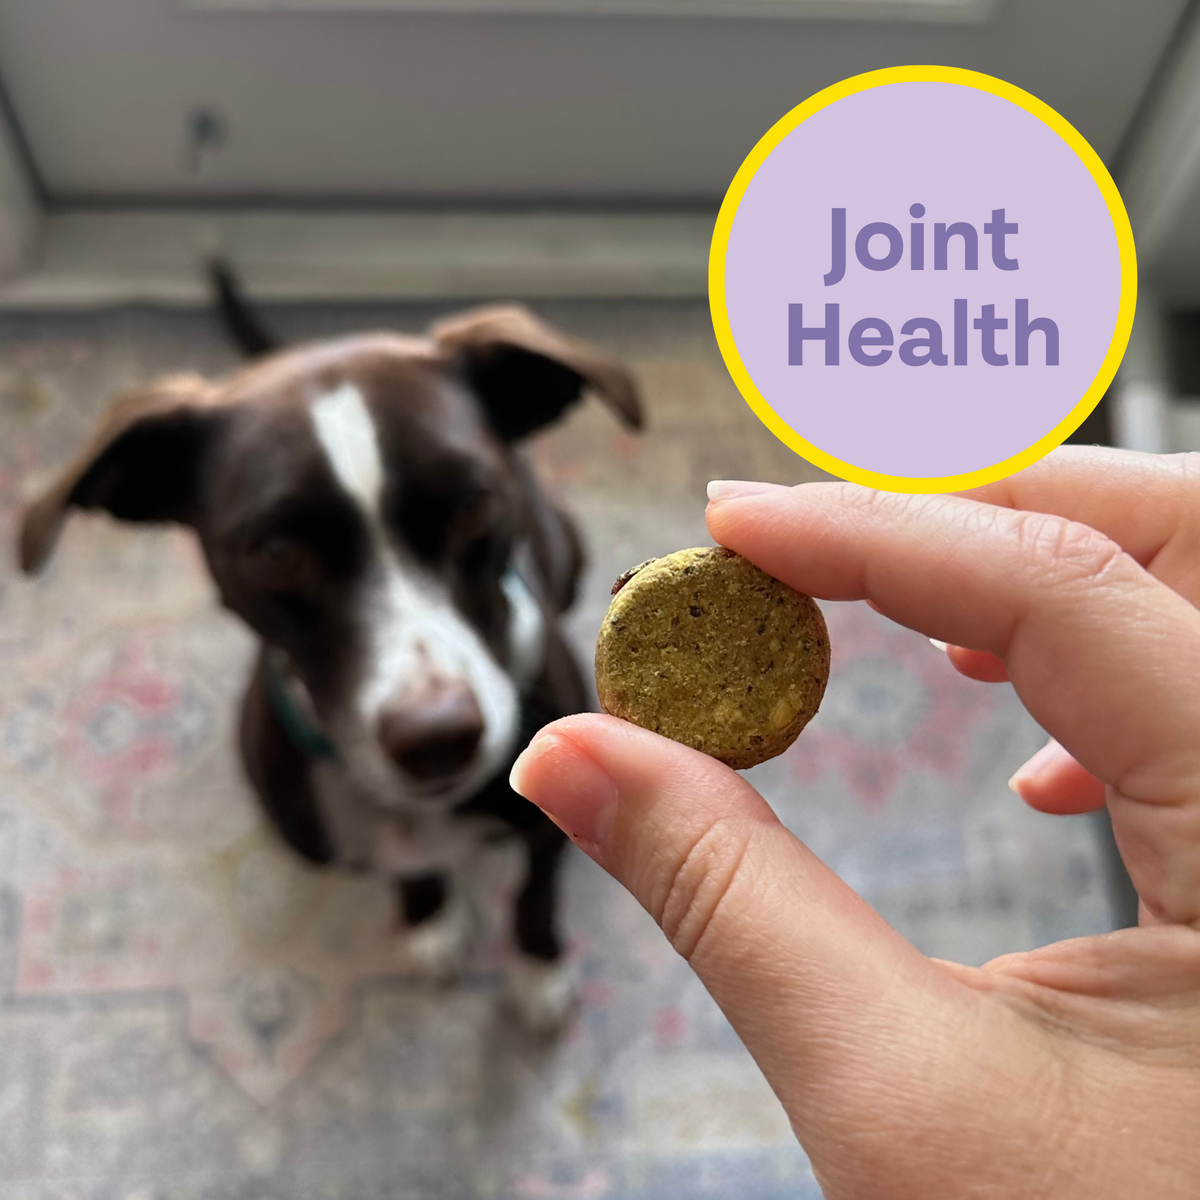 Circle with Joint health message and human hand holding a treat for a dog.